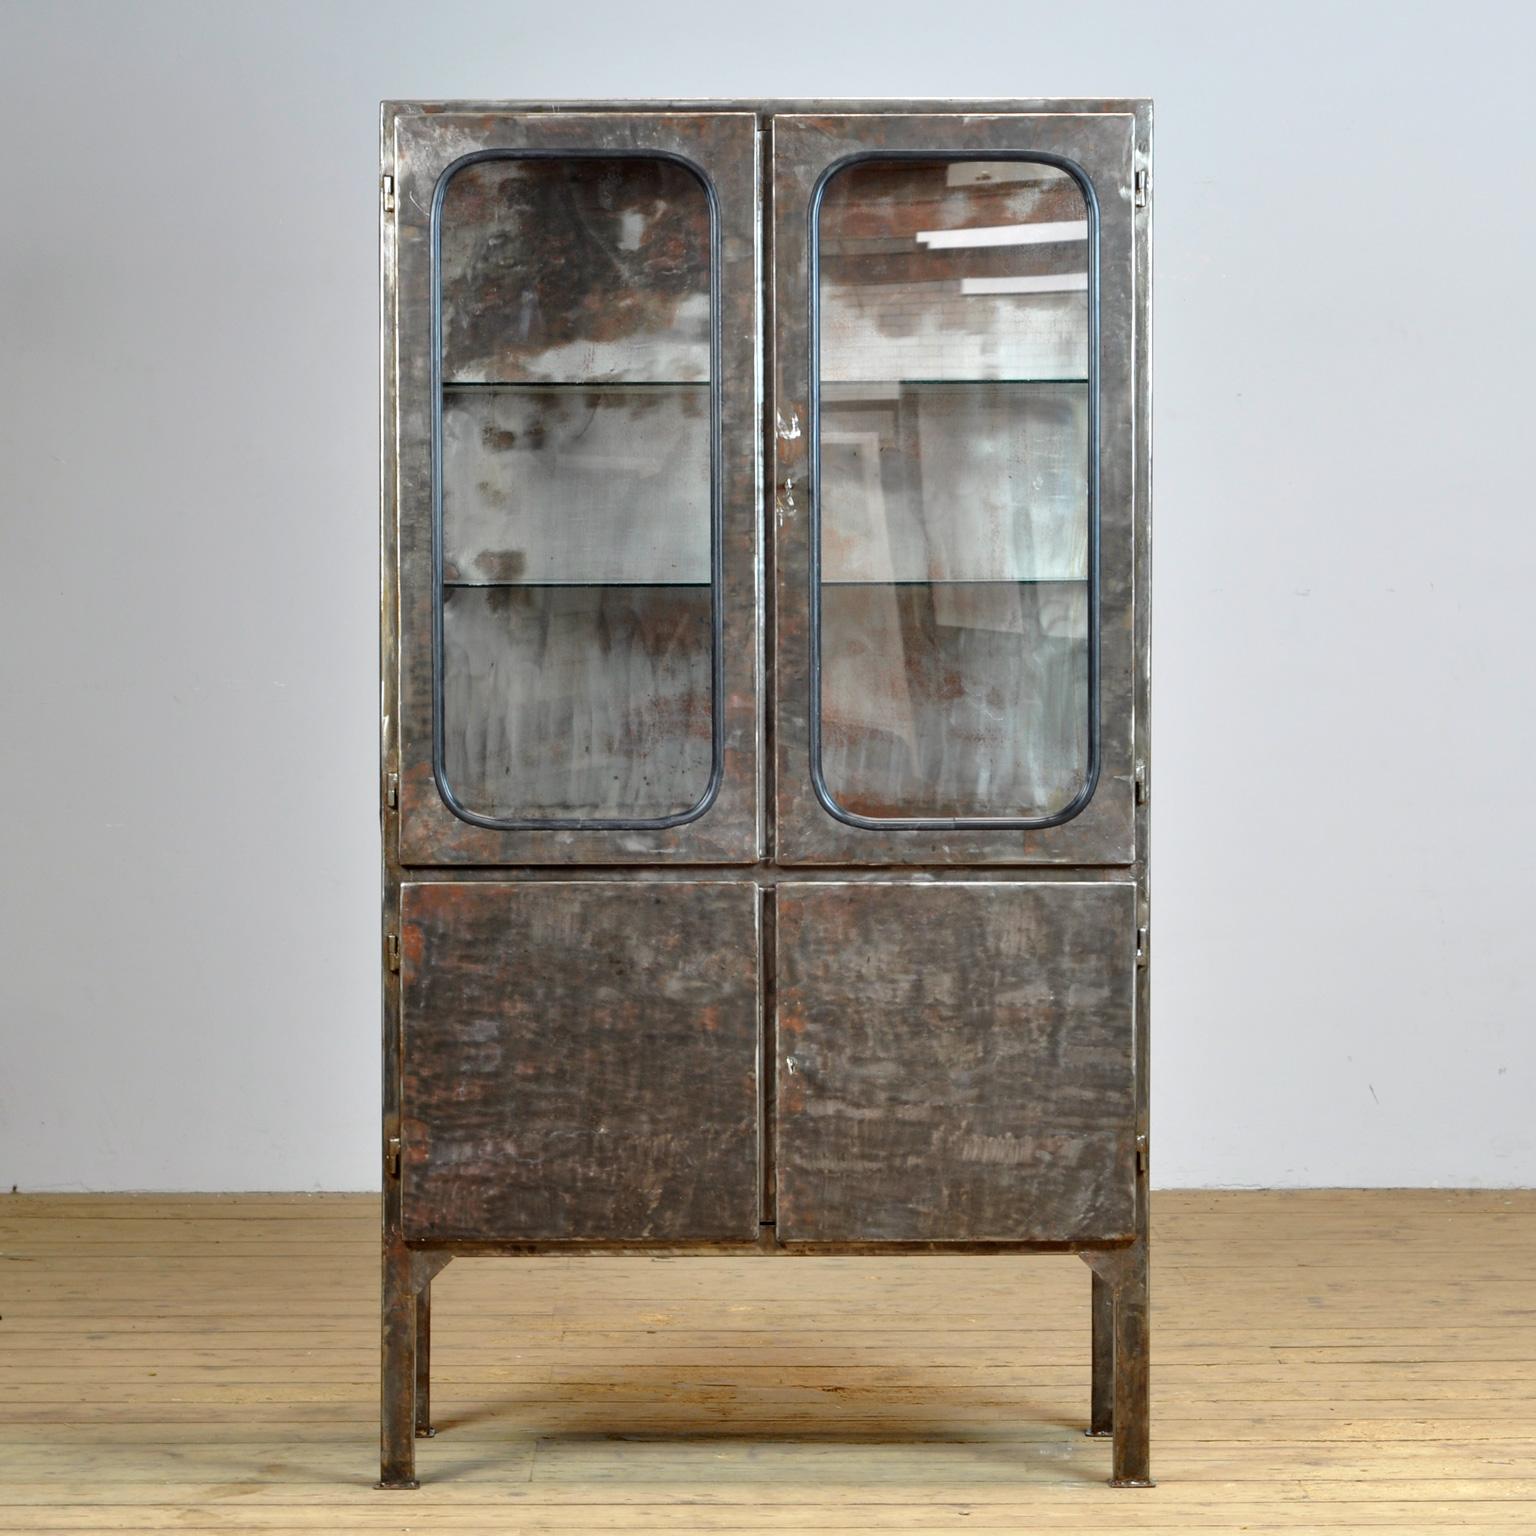 This medical cabinet was designed in the 1970s and was produced circa 1975 in hungary. It is made from iron and glass, which is held by a black rubber strip. The item has been stripped from its paint and treated for rust. The cabinet features two